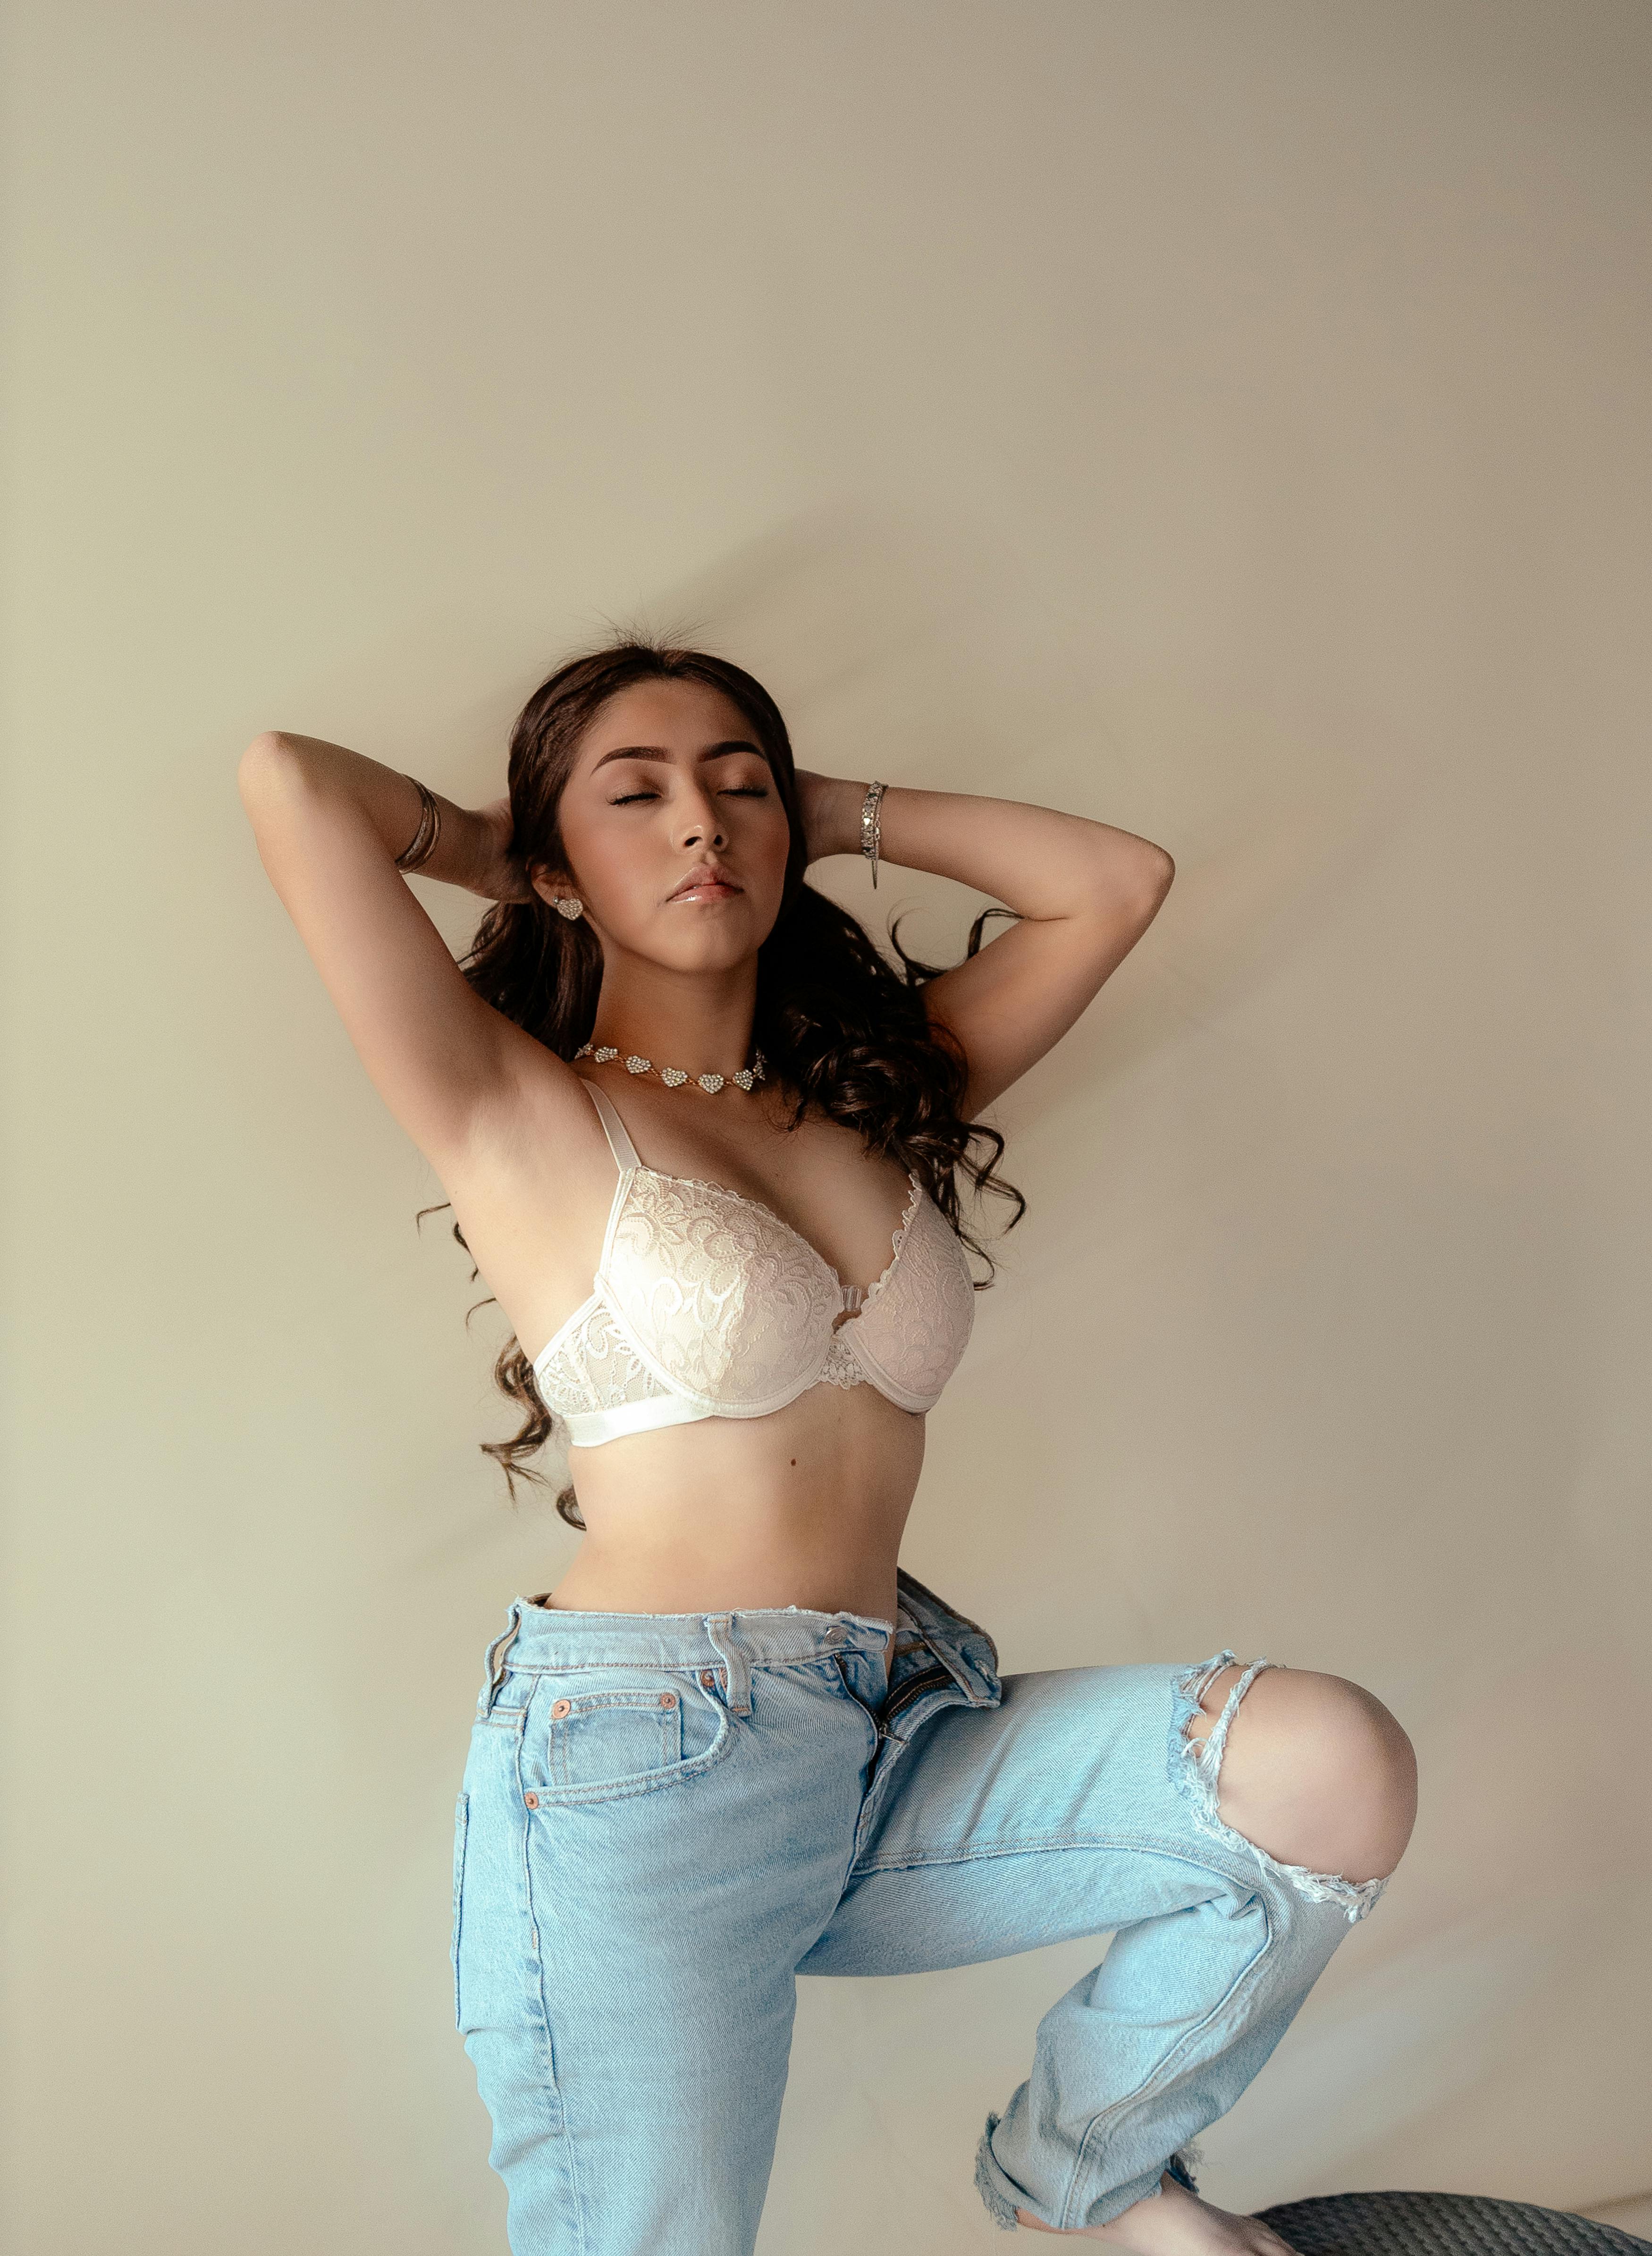 Attractive Girl In White Bra And Jeans Free Stock Photo and Image